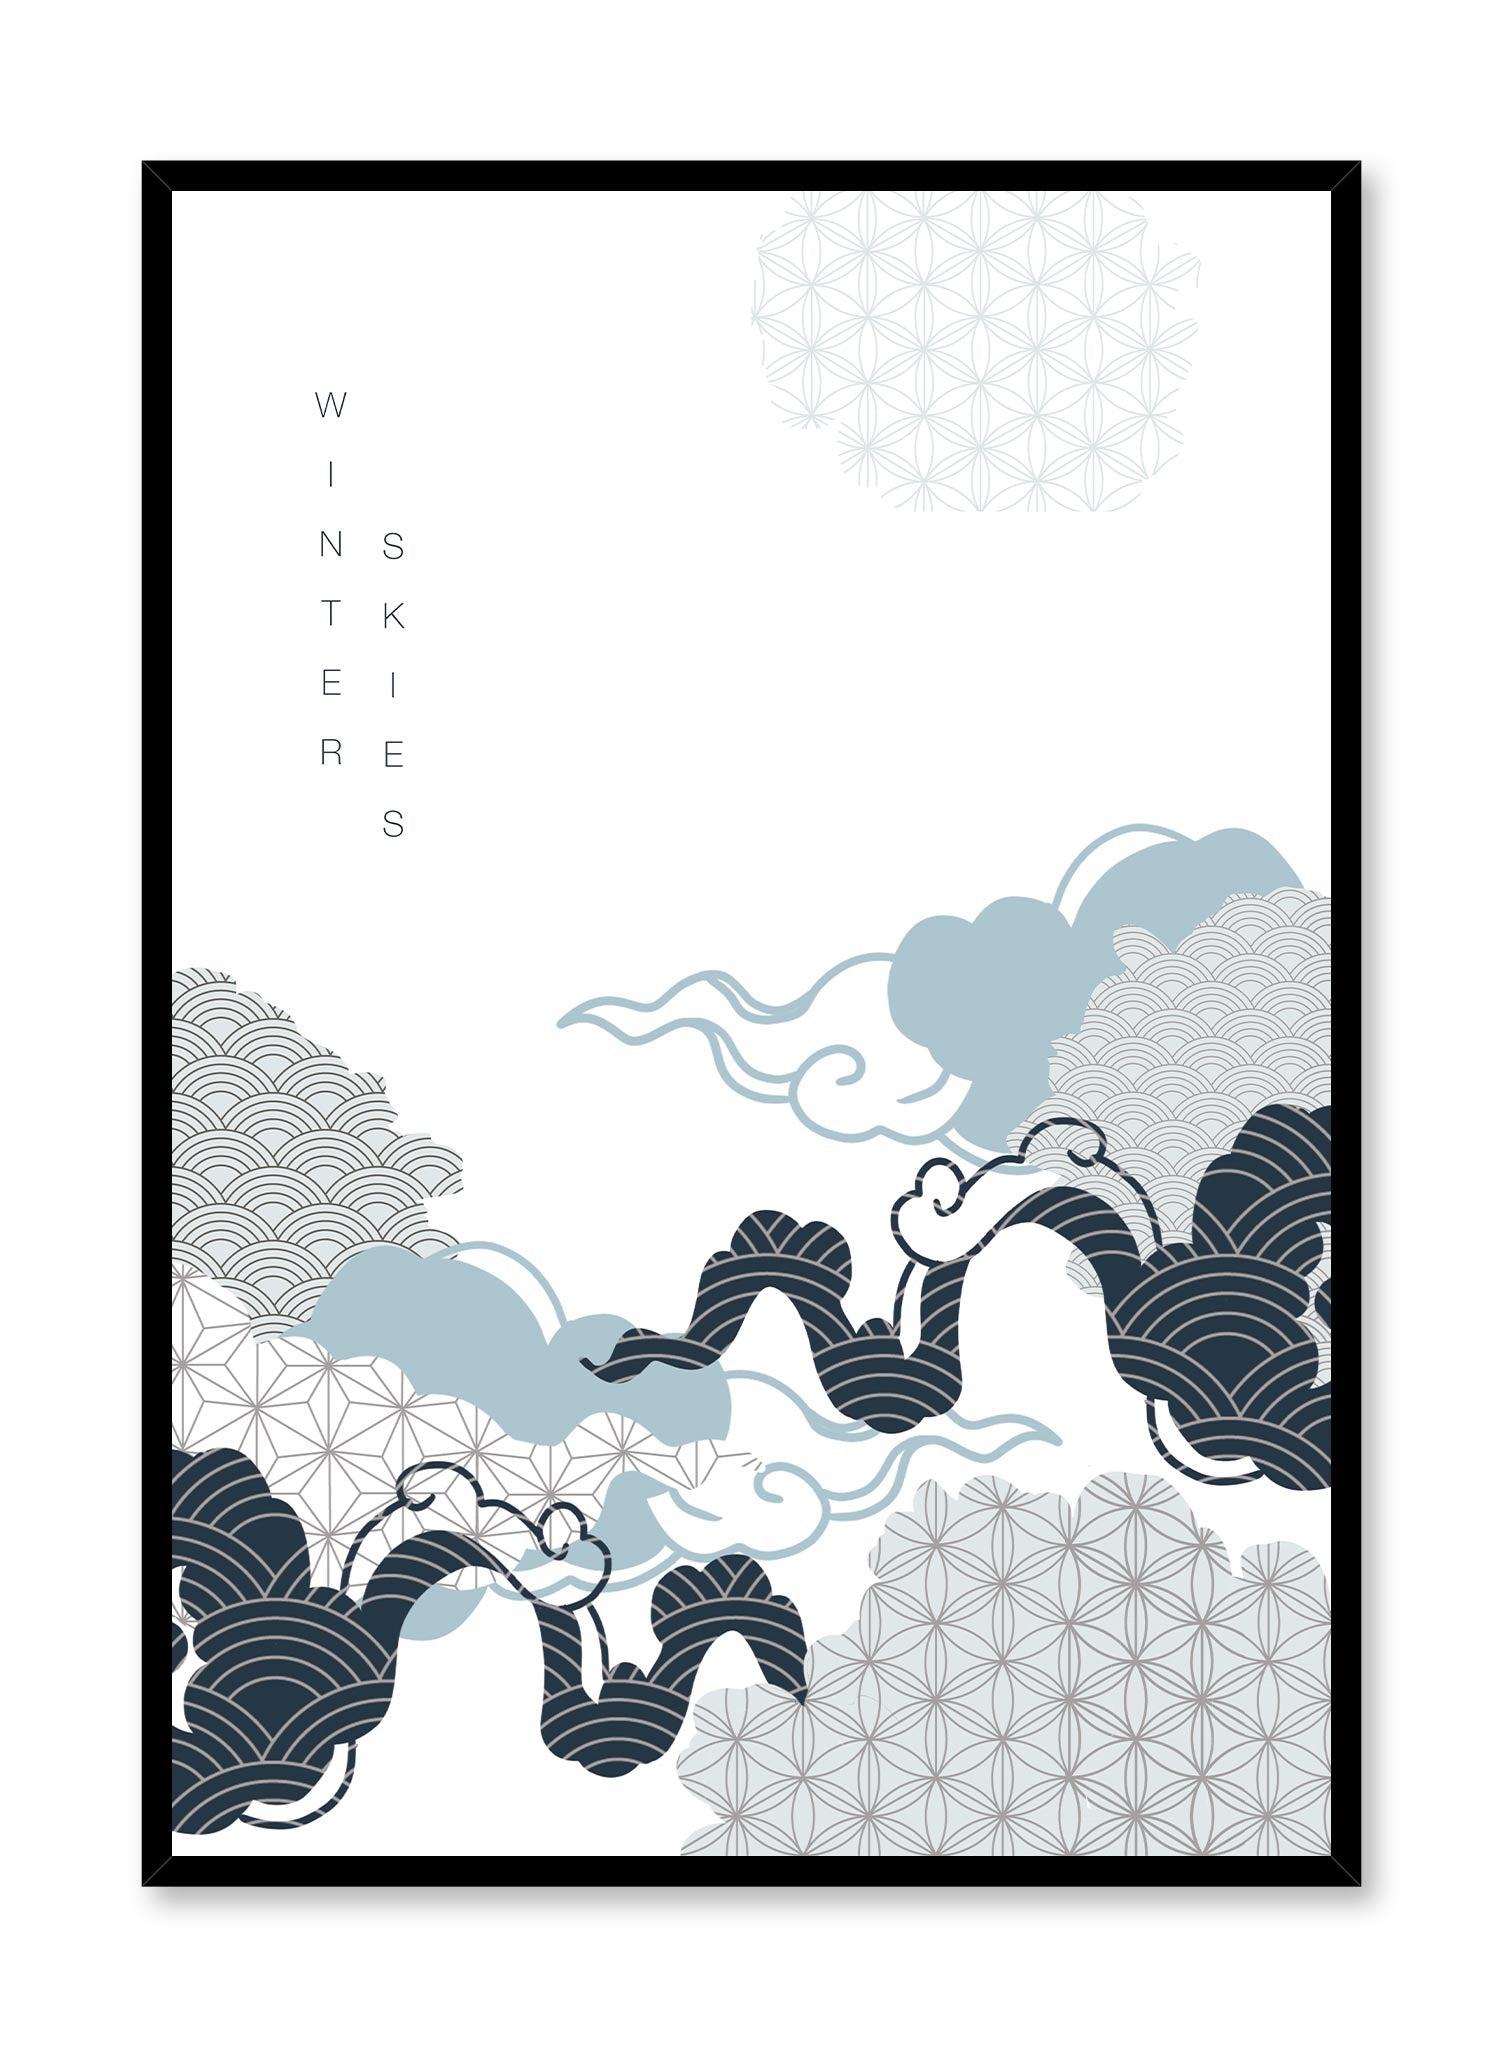 Winter Skies is a minimalist illustration by Opposite Wall of a sky filled with clouds with different oriental patterns with the words “Winter Skies” in the top left.